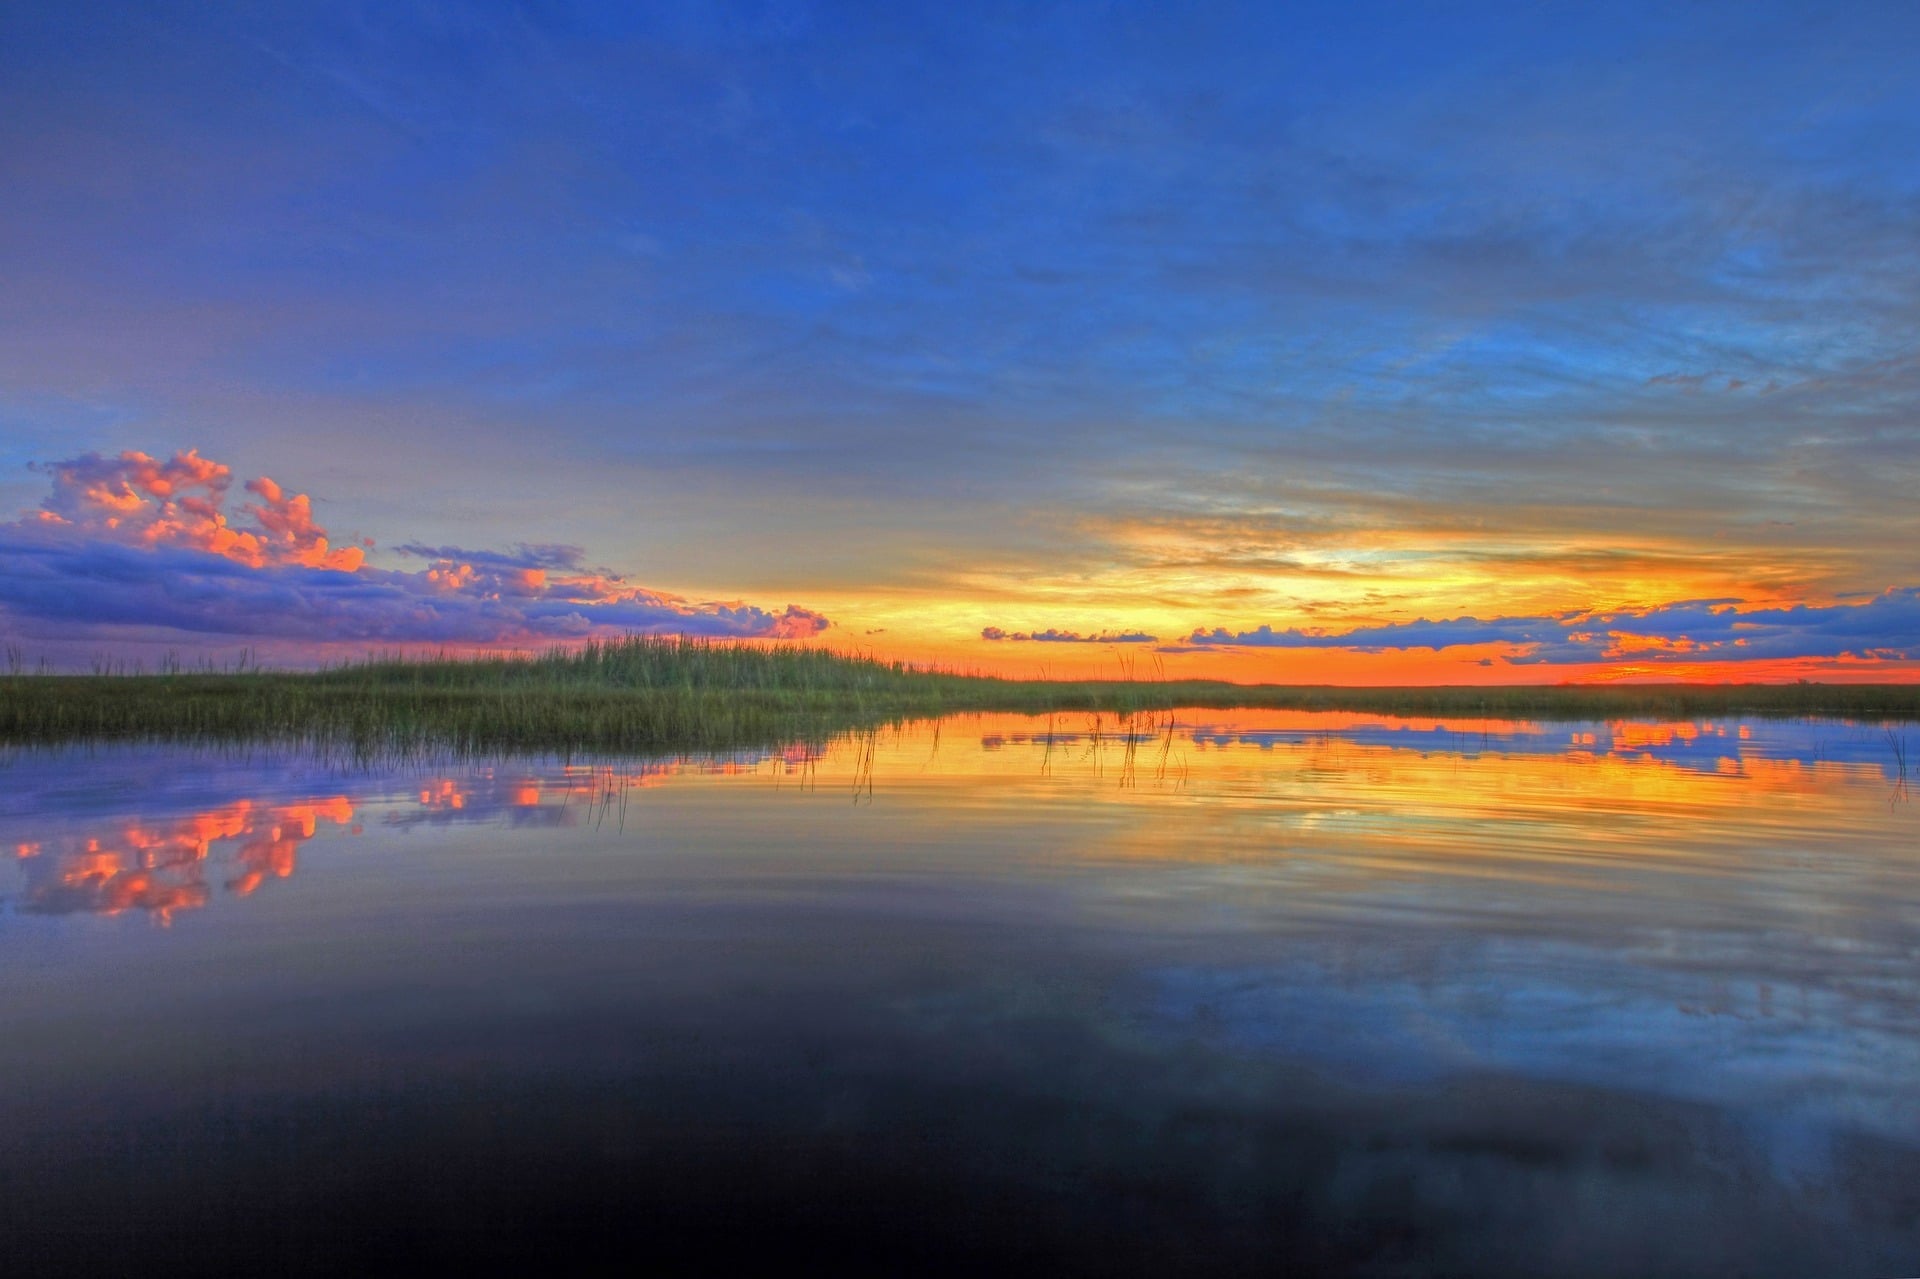 Sunset over the Everglades swamp in Florida